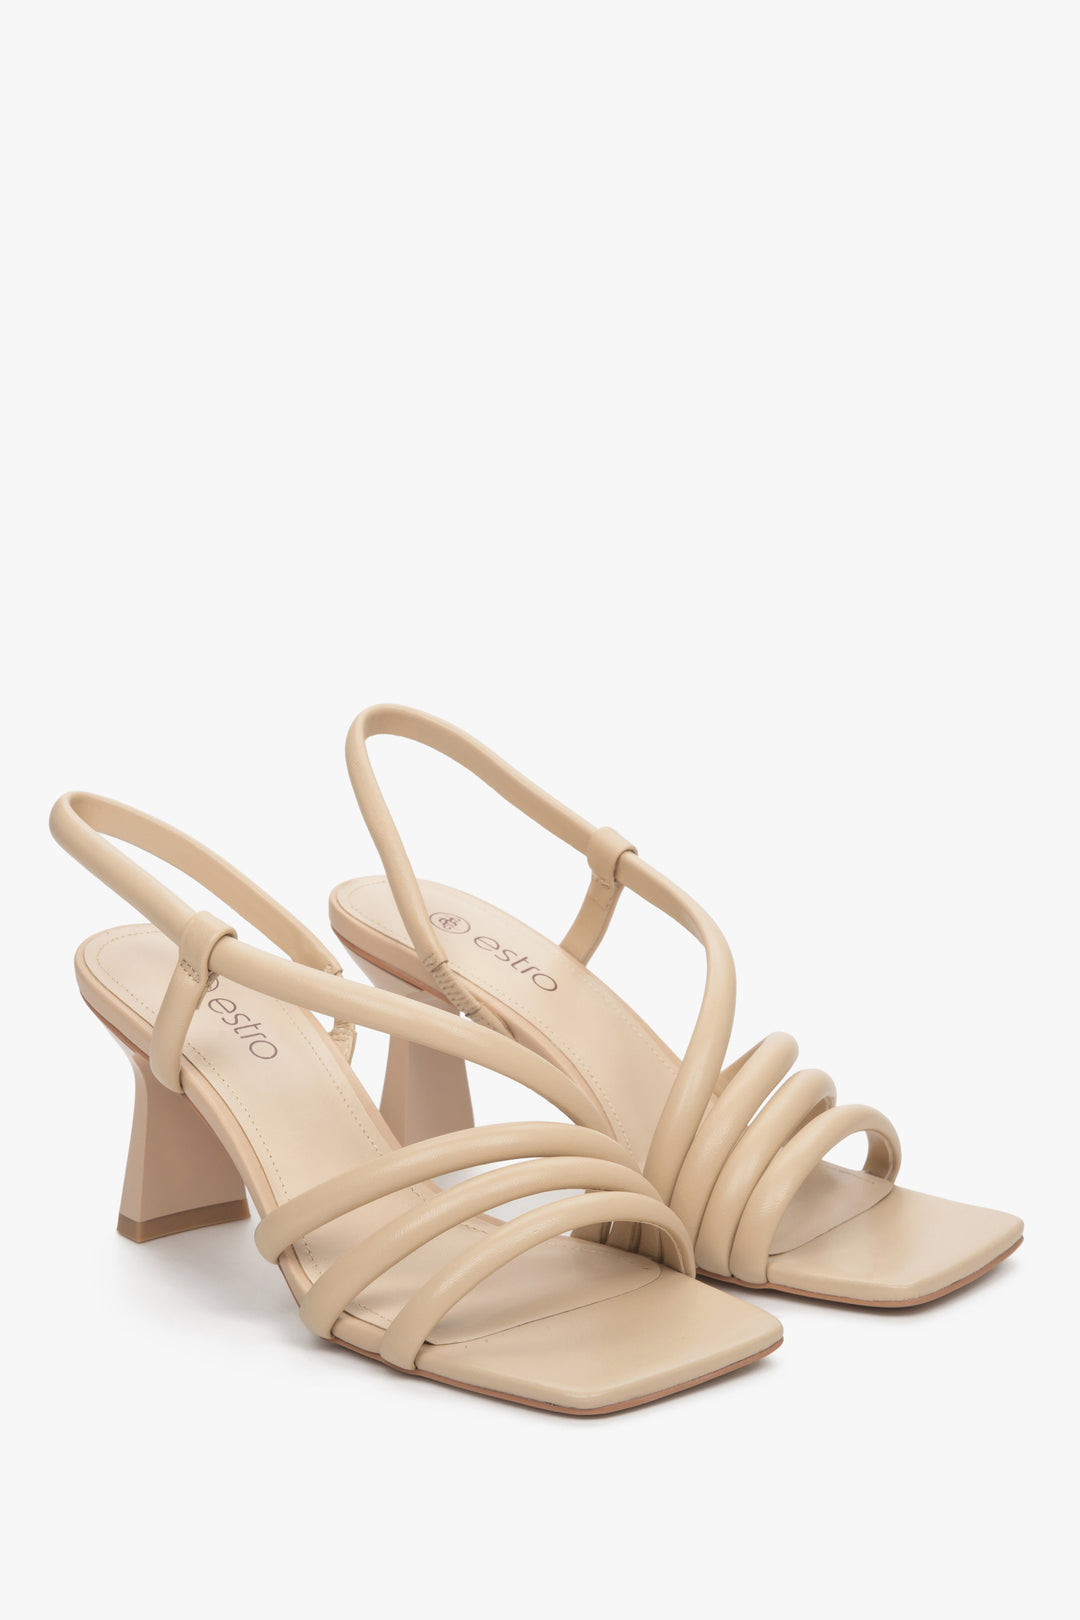 Strappy women's sandals in beige made of natural leather by Estro.